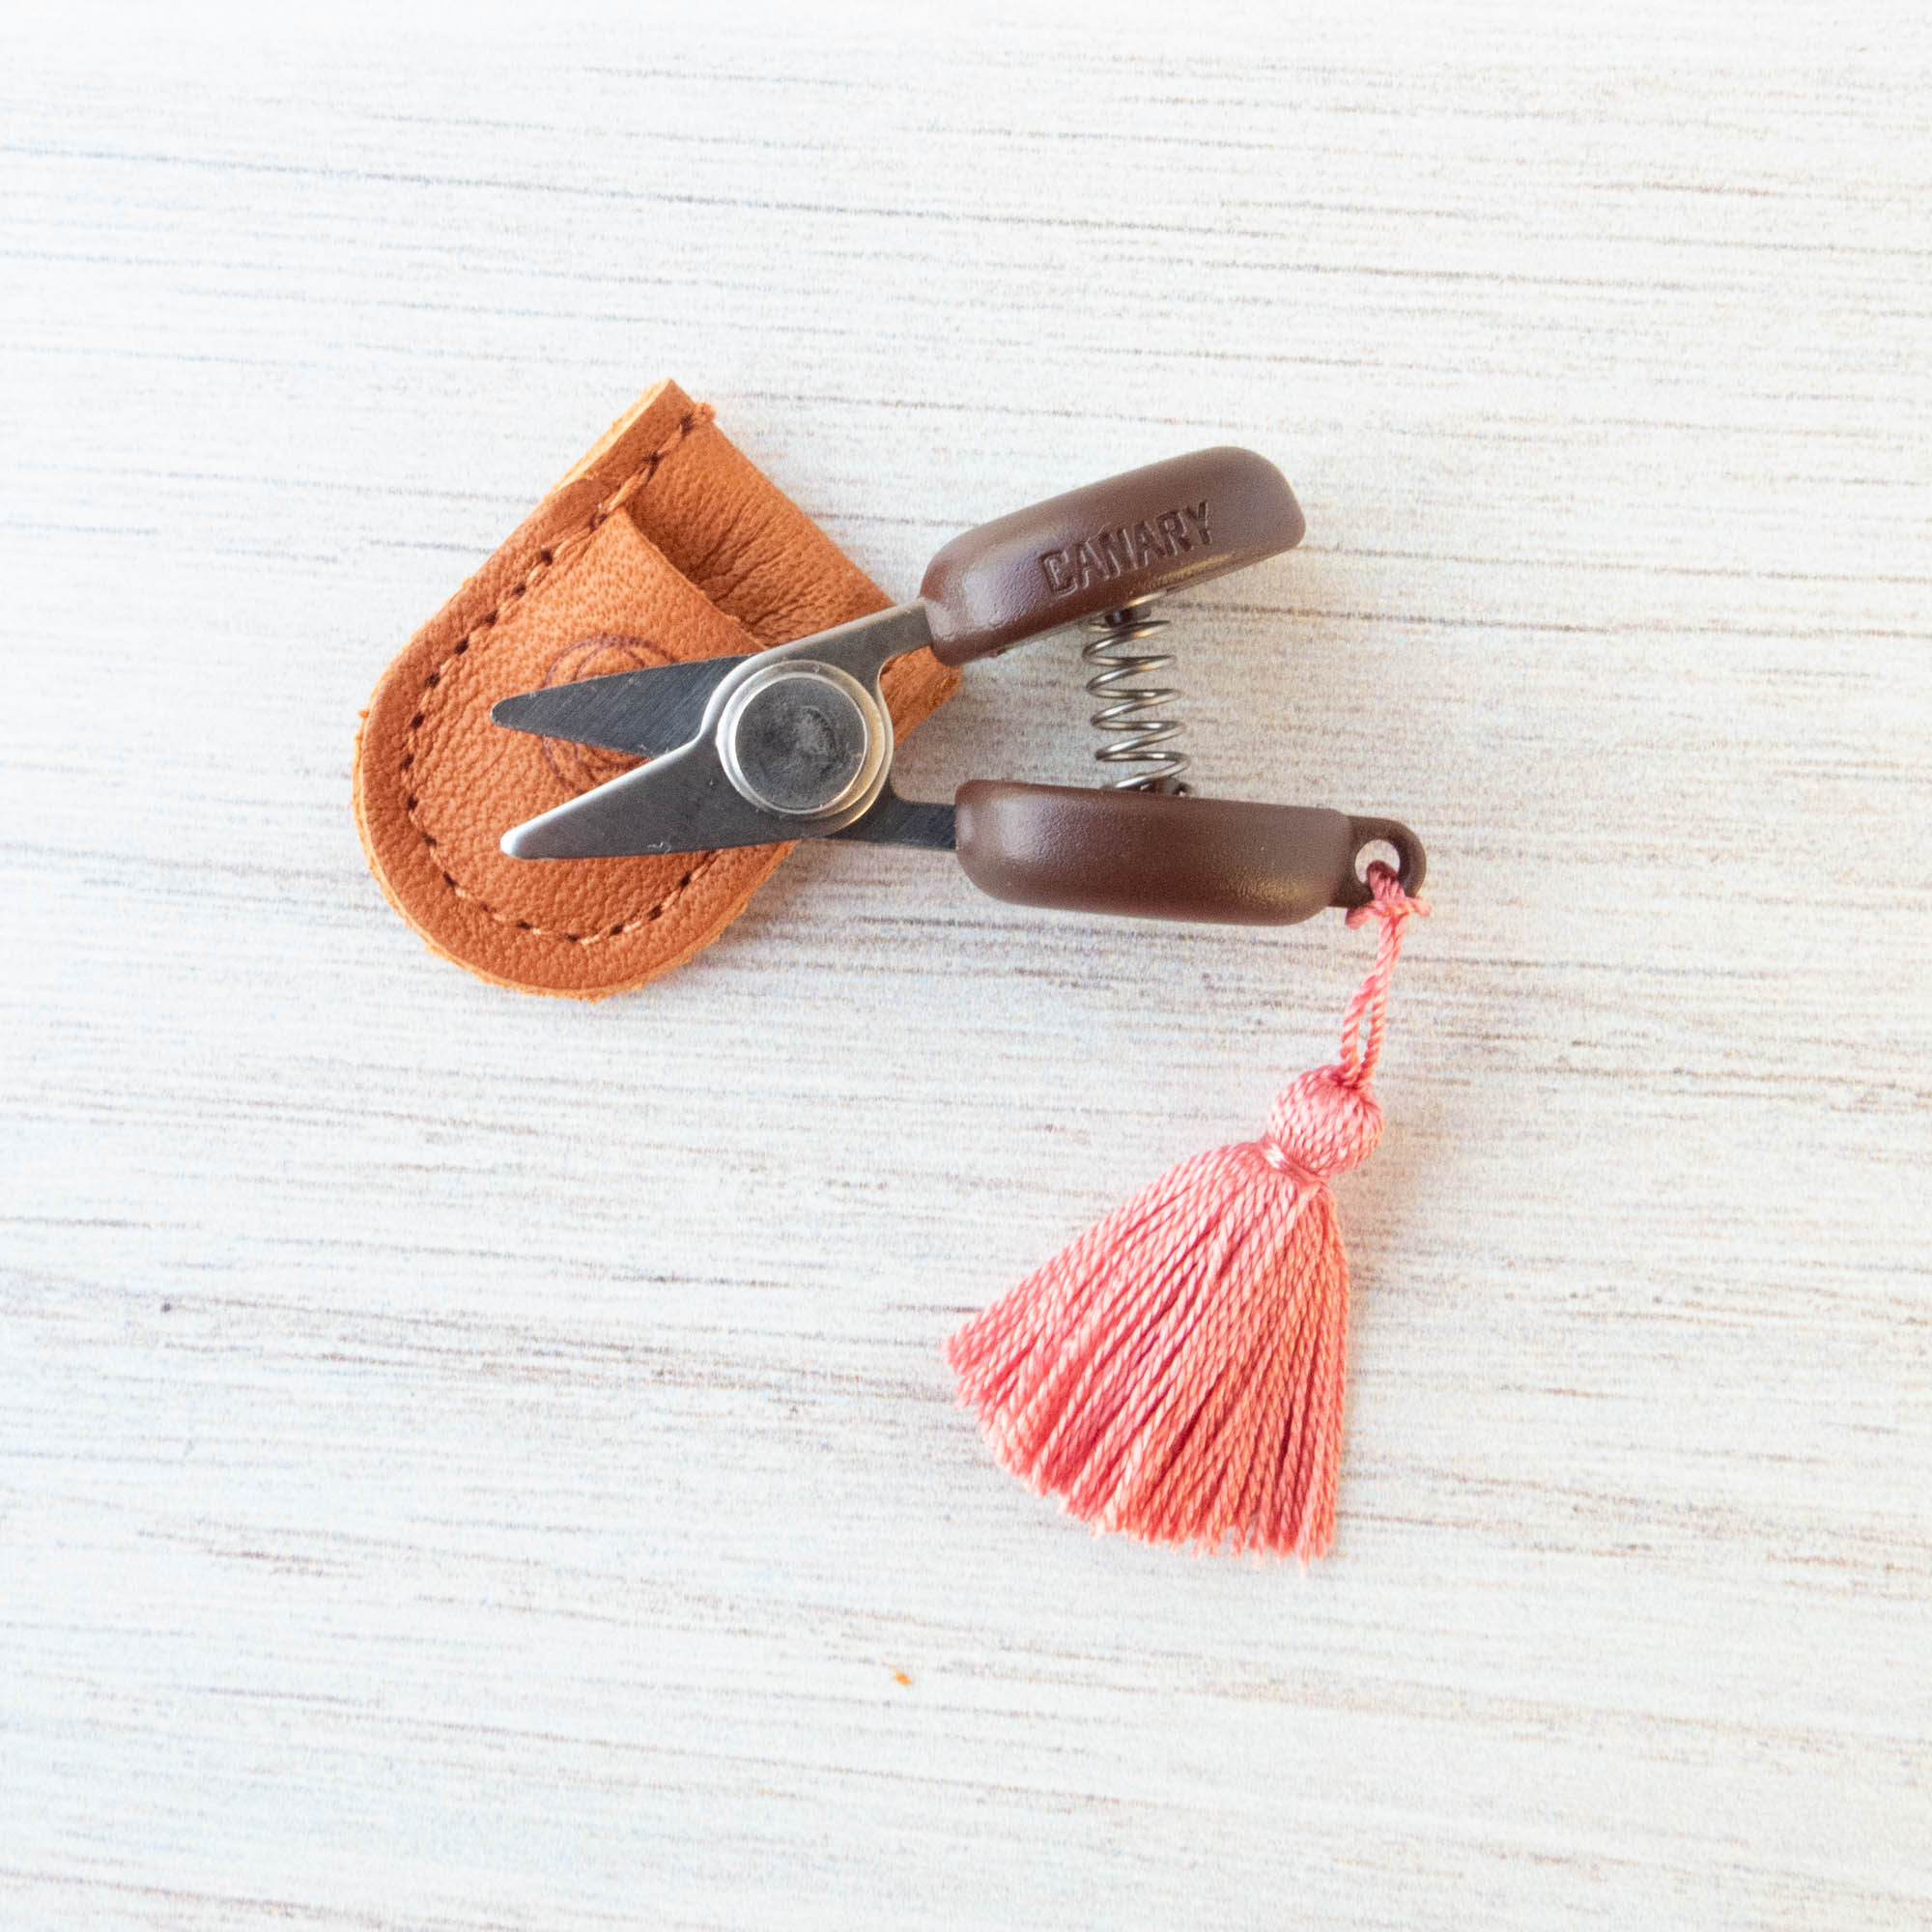 Snazzy Snips: Cute Scissors to Cut Your Thread